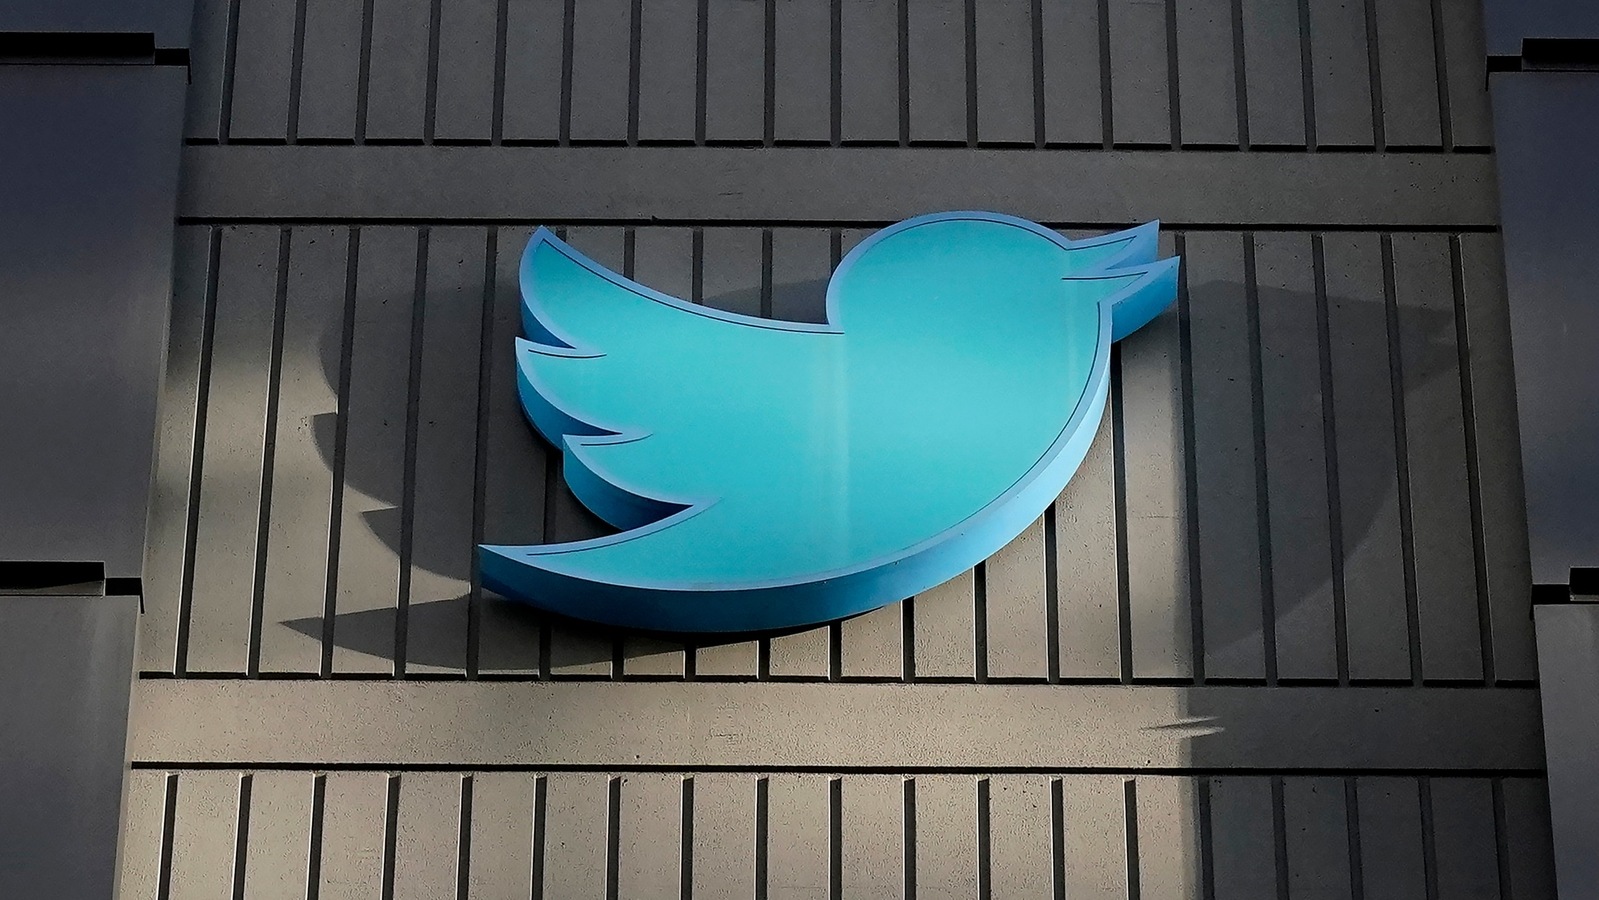 twitter-layoffs-employees-in-marketing-and-communications-department-in-india-reports